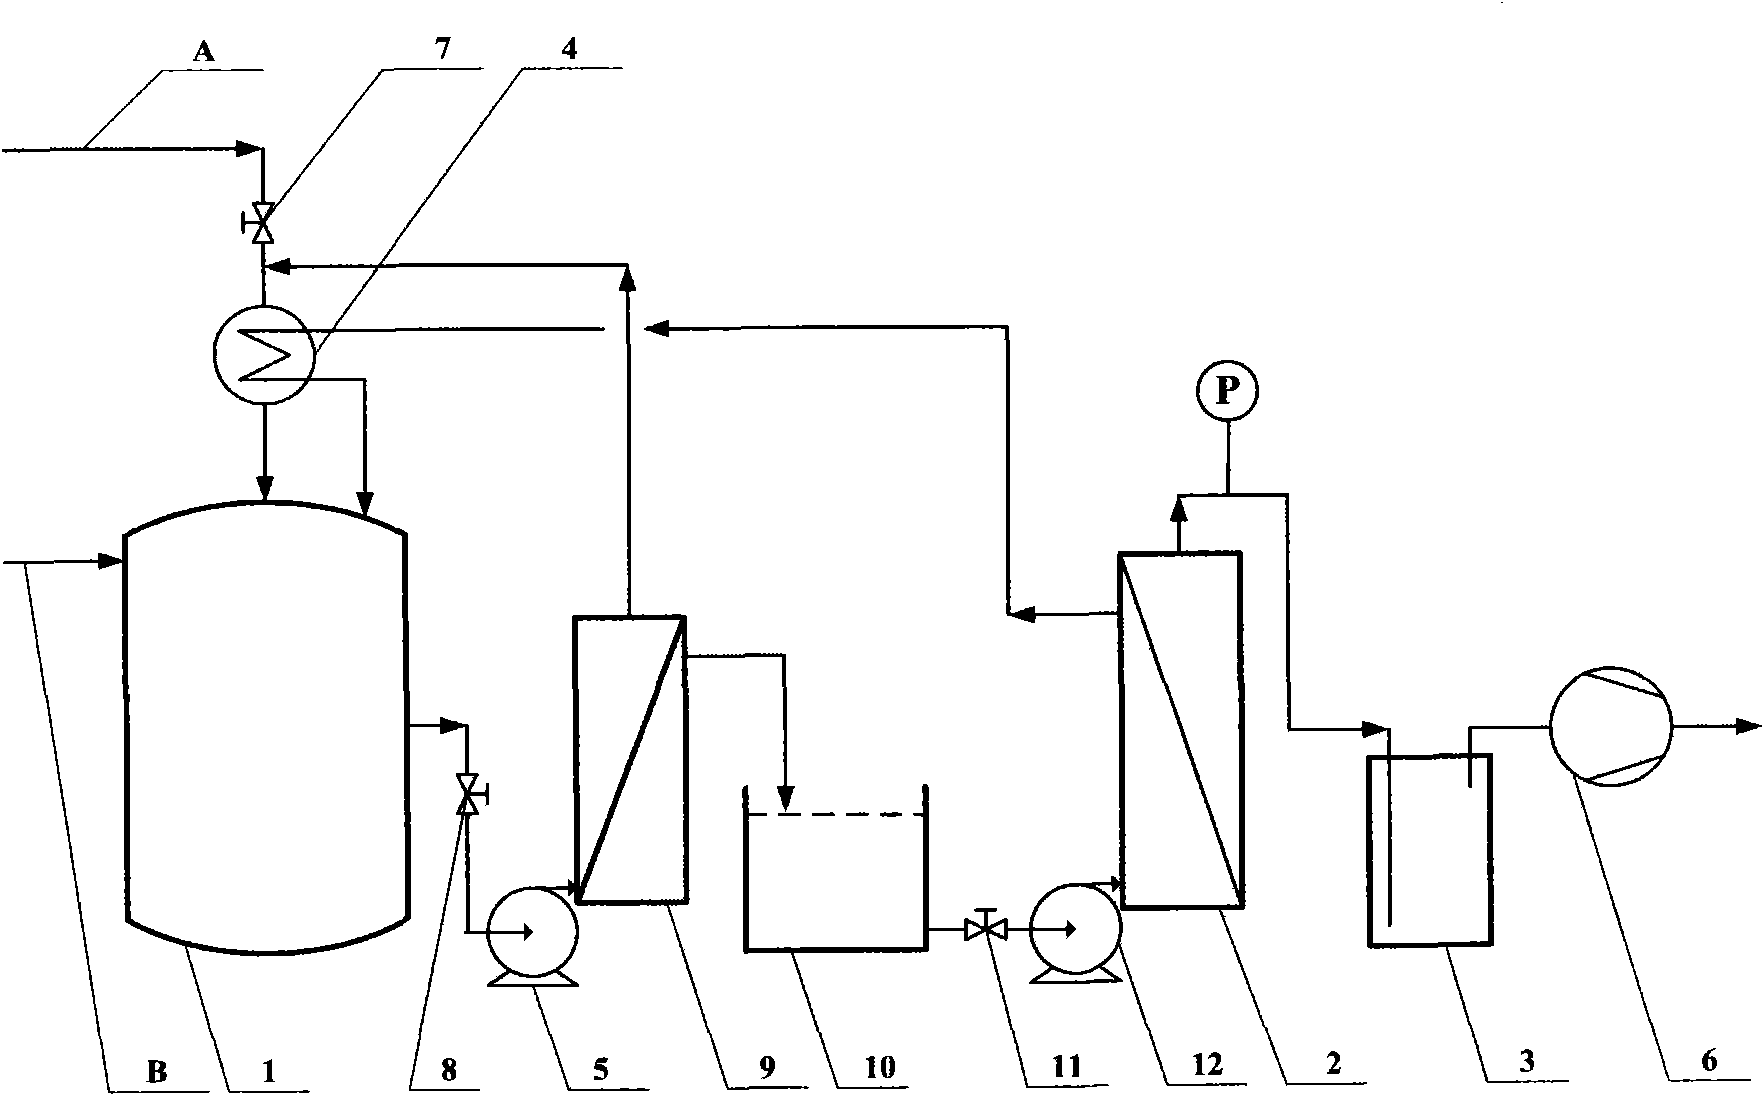 Process for separating acetone, butanol and ethanol in situ by coupling biomass fermentation and pervaporation